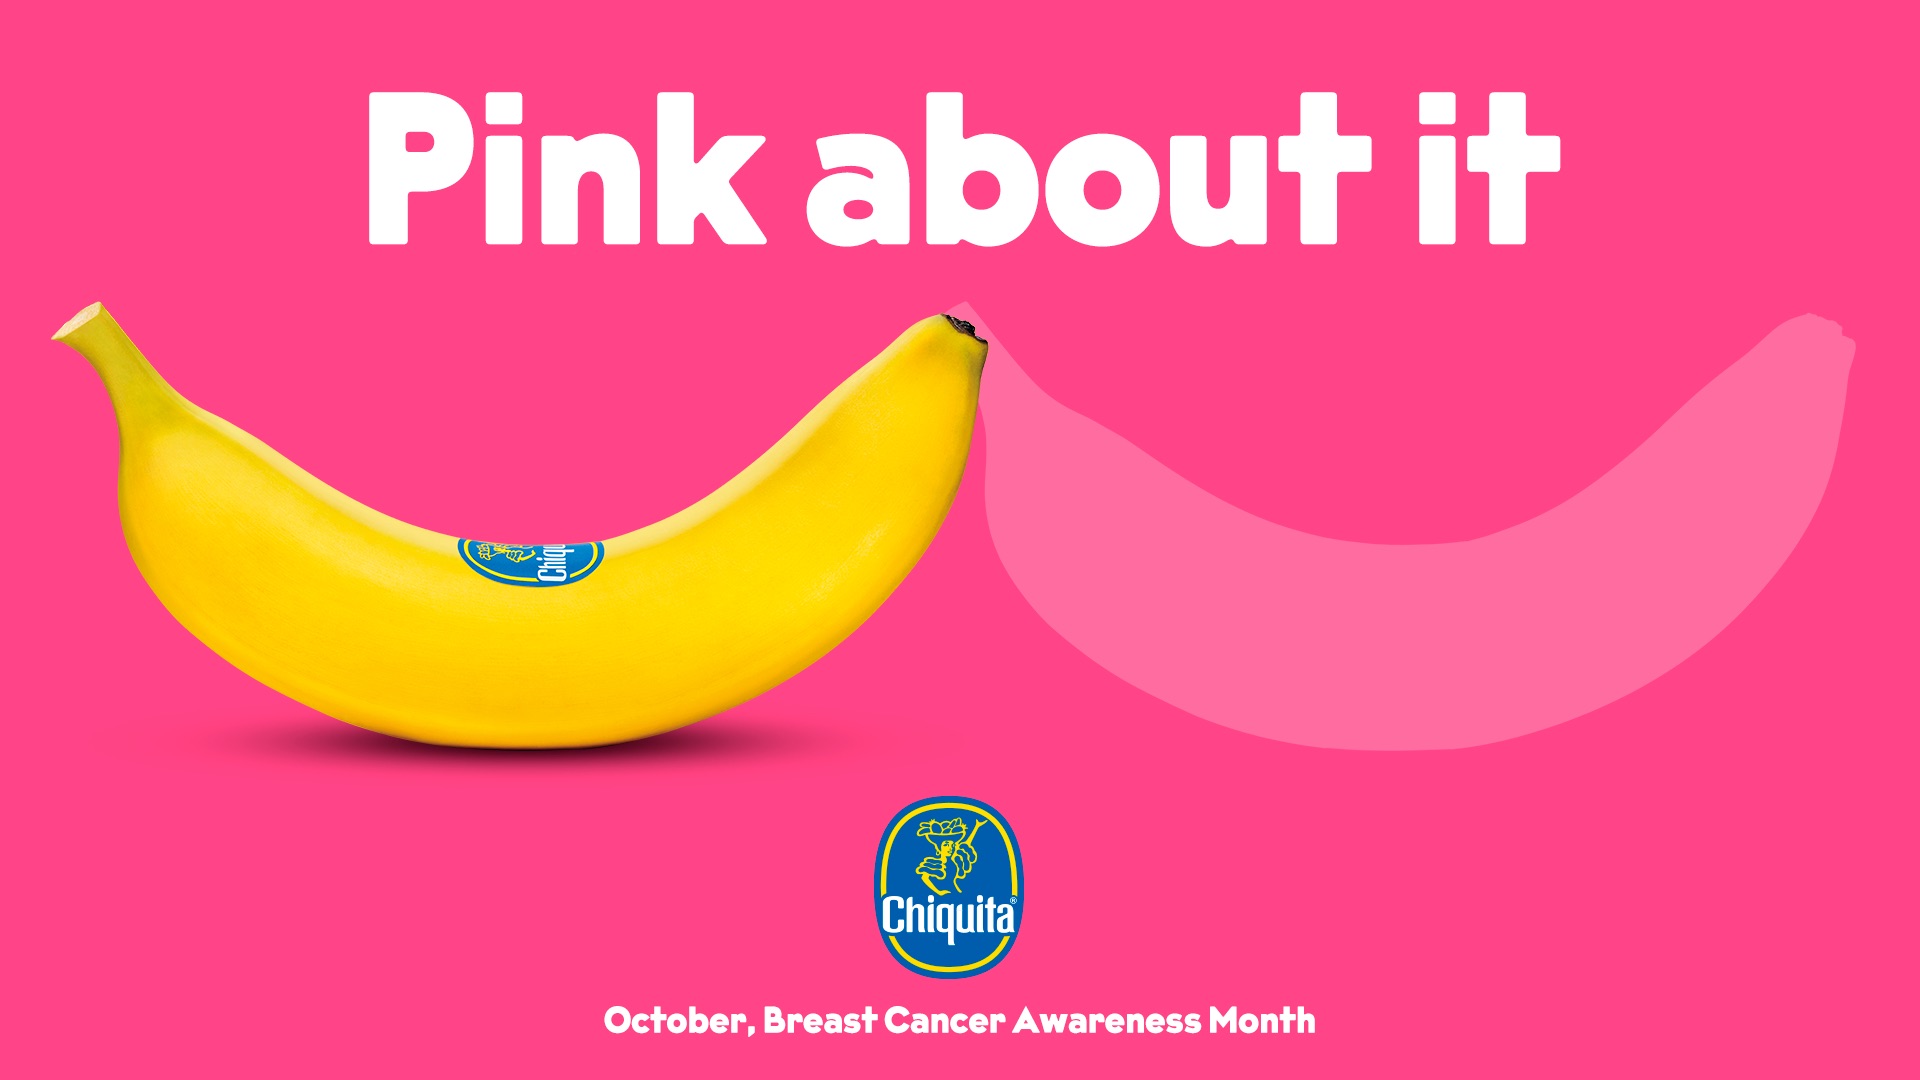 CHIQUITA LAUNCHES ITS NEW CORPORATE SOCIAL RESPONSIBILITY CAMPAIGN CREATED BY ARMANDO TESTA